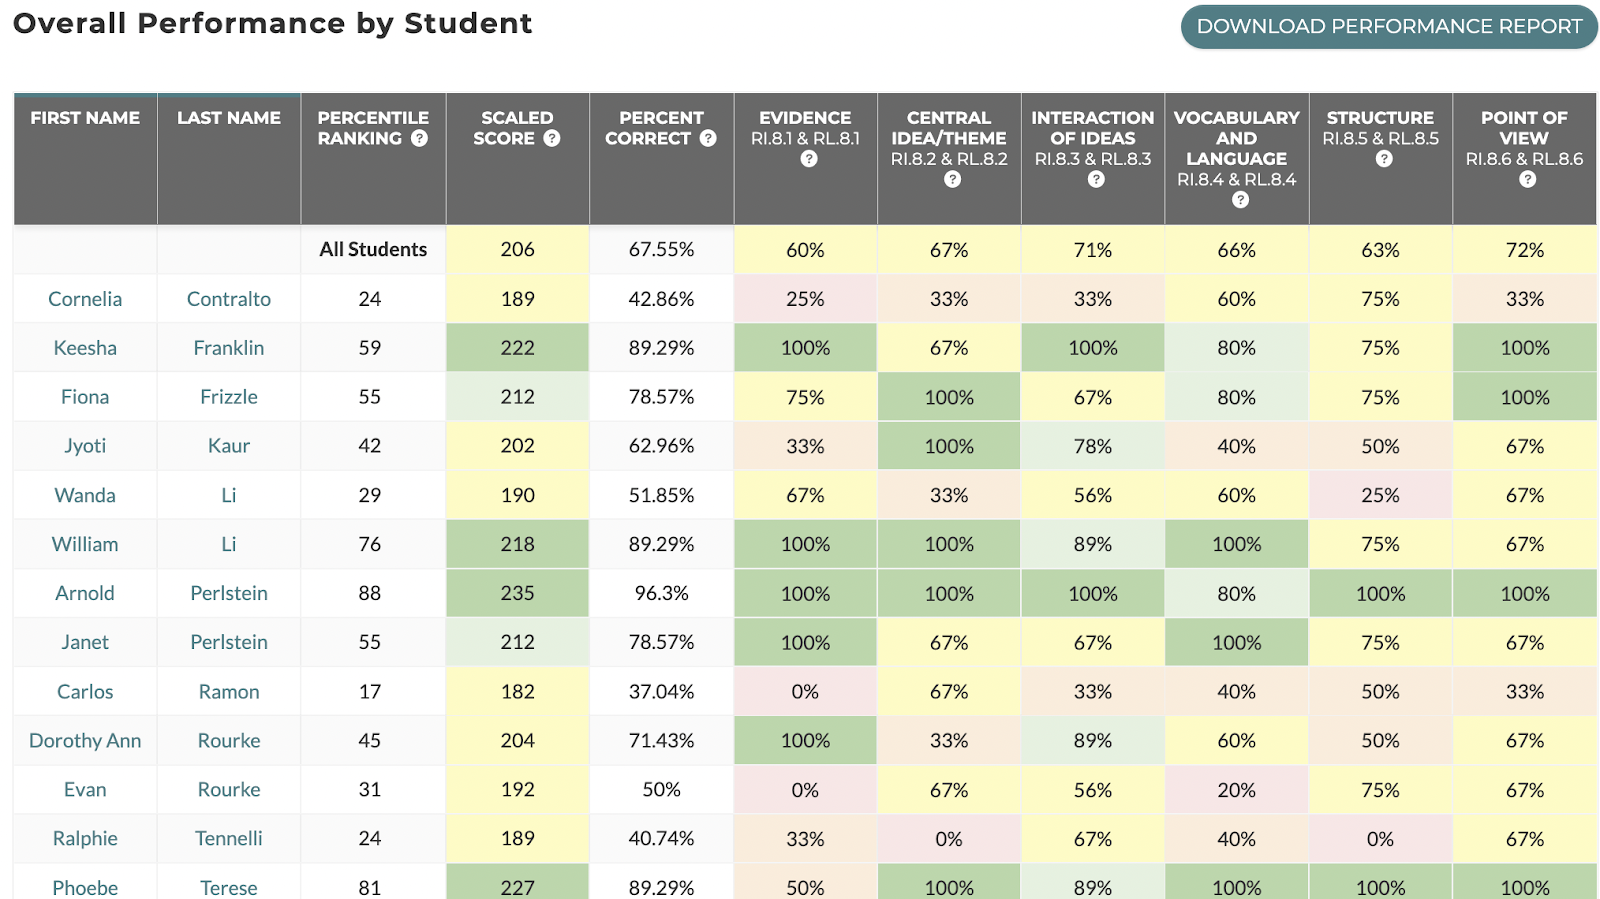 Overall performance data from students who use CommonLit